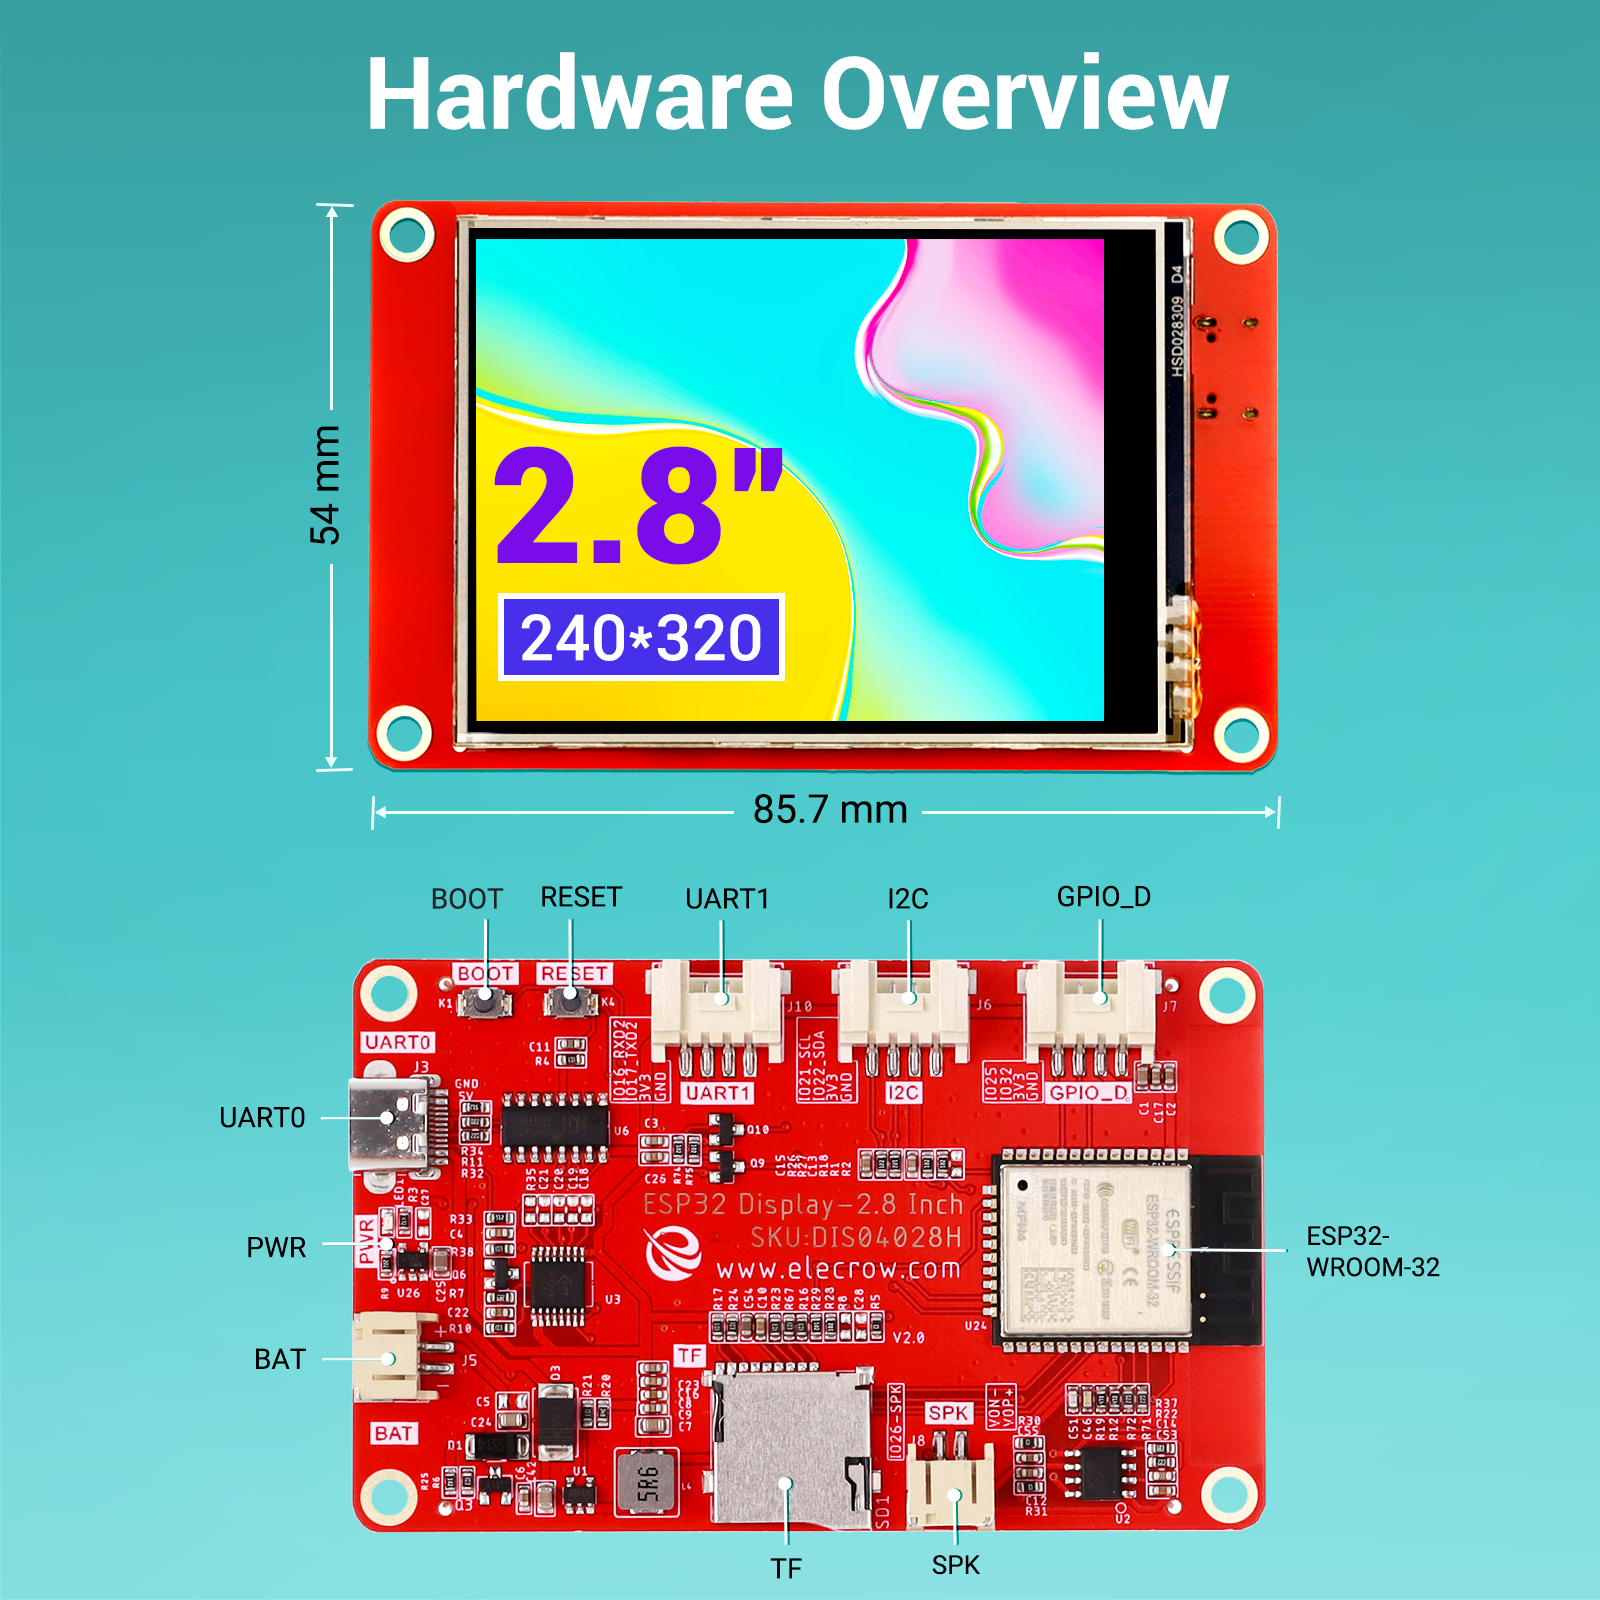 2.4 inch display hardware overview